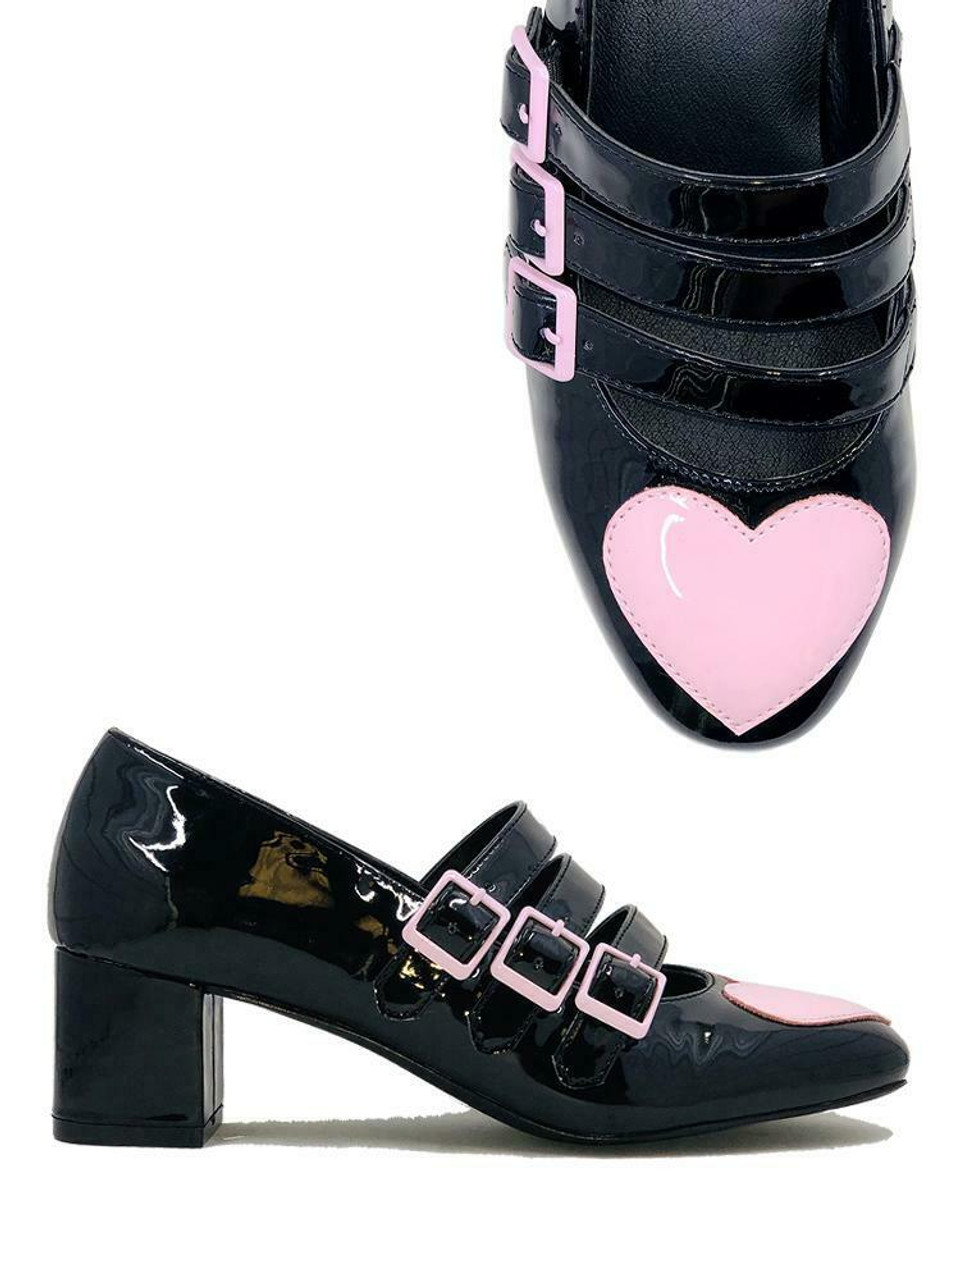 black and pink shoes heels